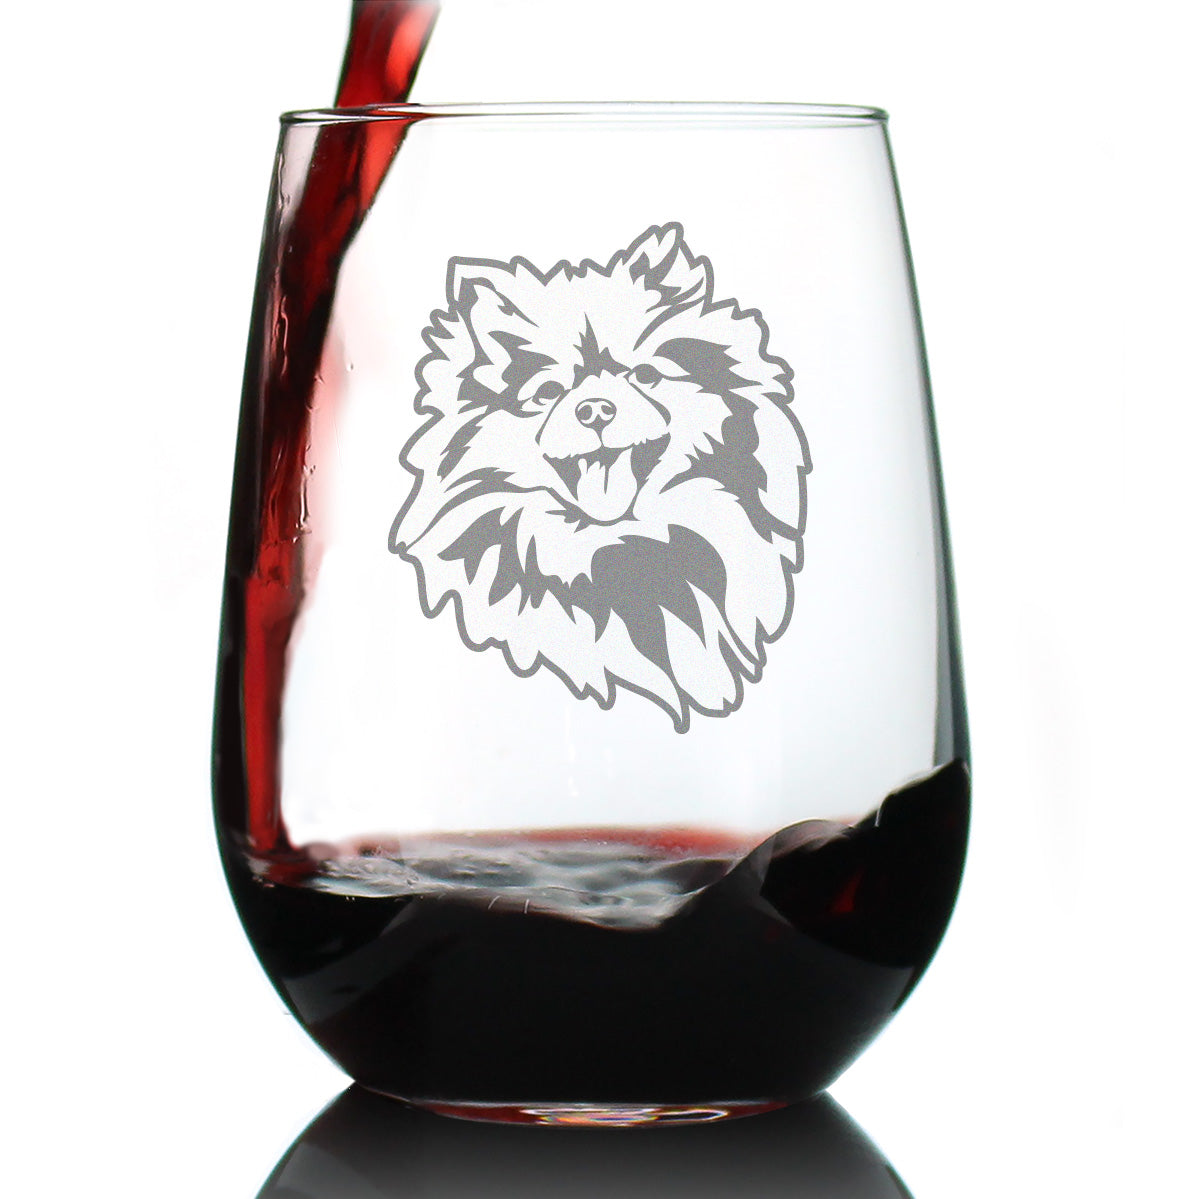 Pomeranian Face Stemless Wine Glass - Cute Dog Themed Decor and Gifts for Moms &amp; Dads of Pomeranians- Large 17 Oz